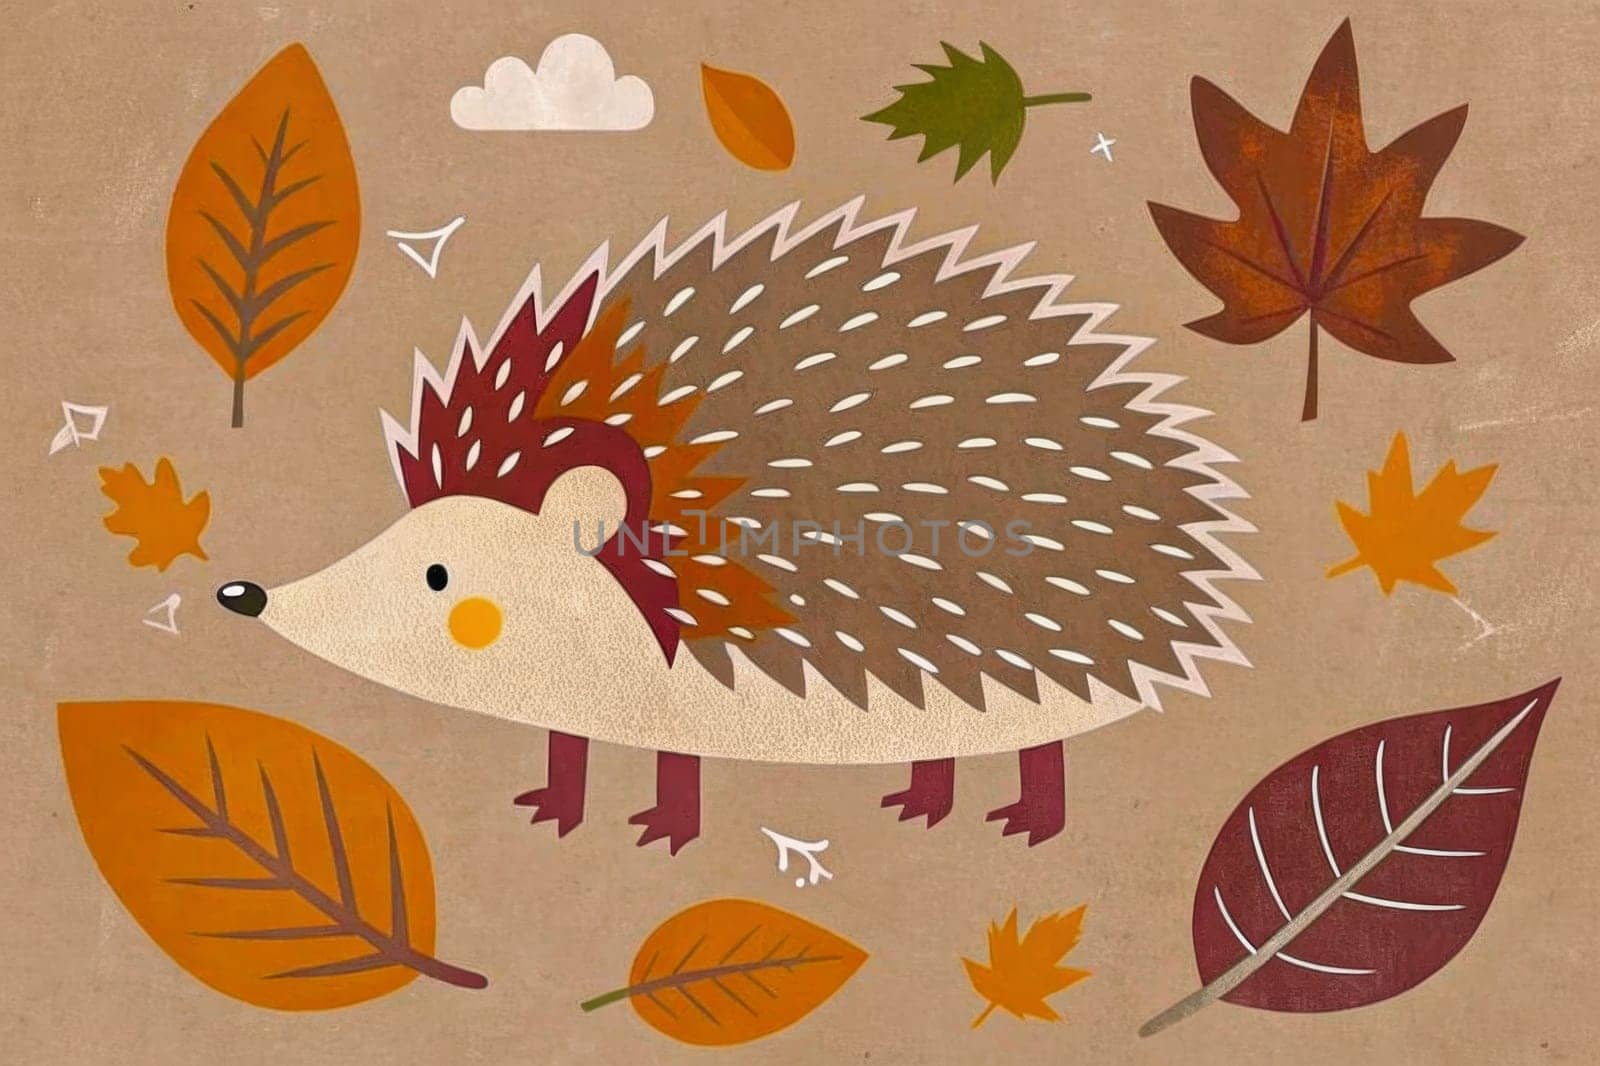 A hedgehog with black and gray spines stands on an orange background. Surrounding the hedgehog are scattered, brightly colored autumn leaves, swirling around it as they fall.